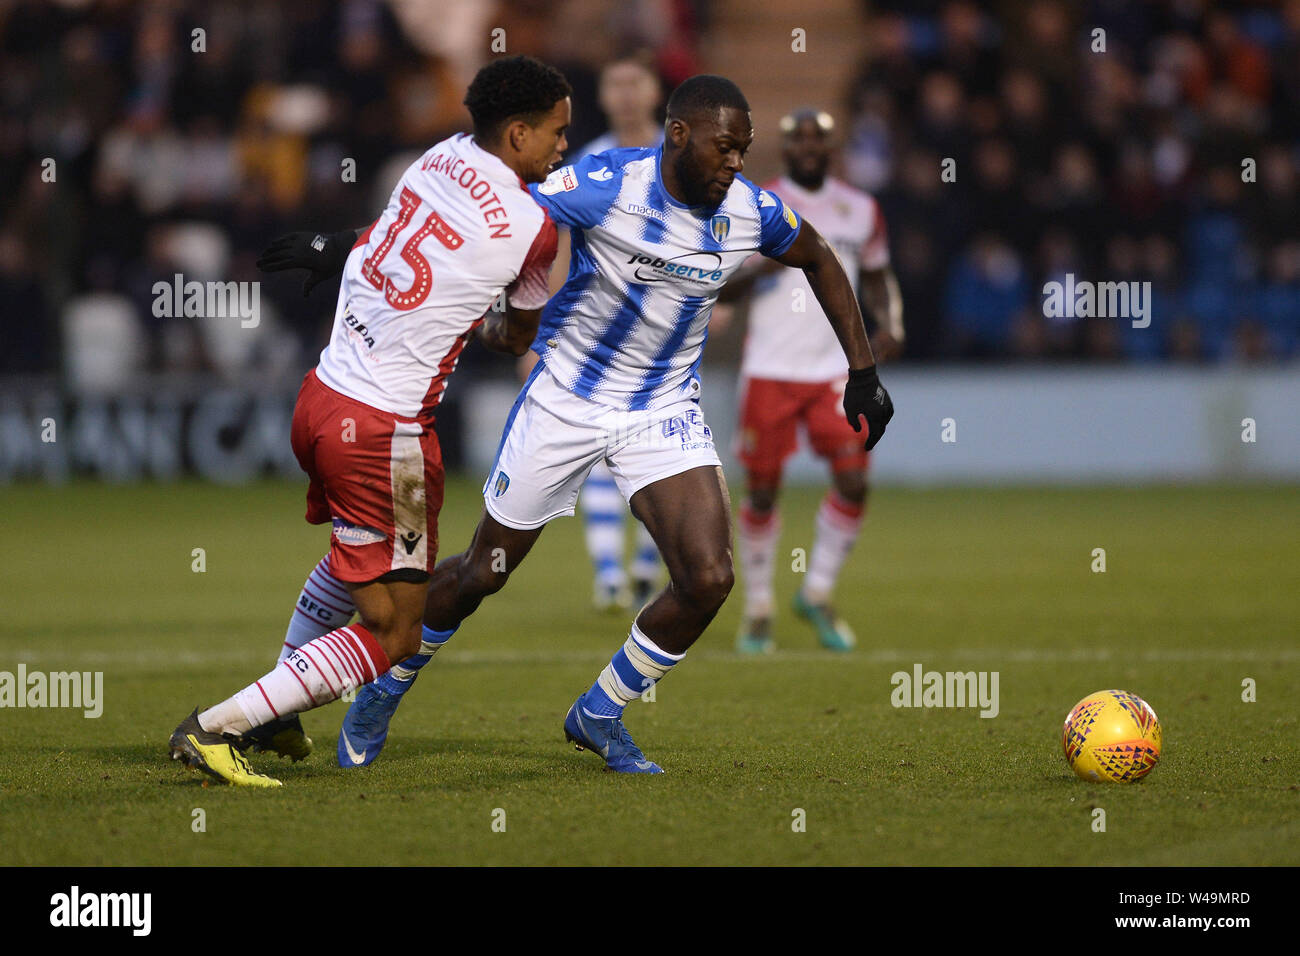 Frank Nouble of Colchester United does battle with Terence Vancooten of Stevenage - Colchester United v Stevenage, Sky Bet League Two, JobServe Community Stadium, Colchester - 26th December 2018 Stock Photo